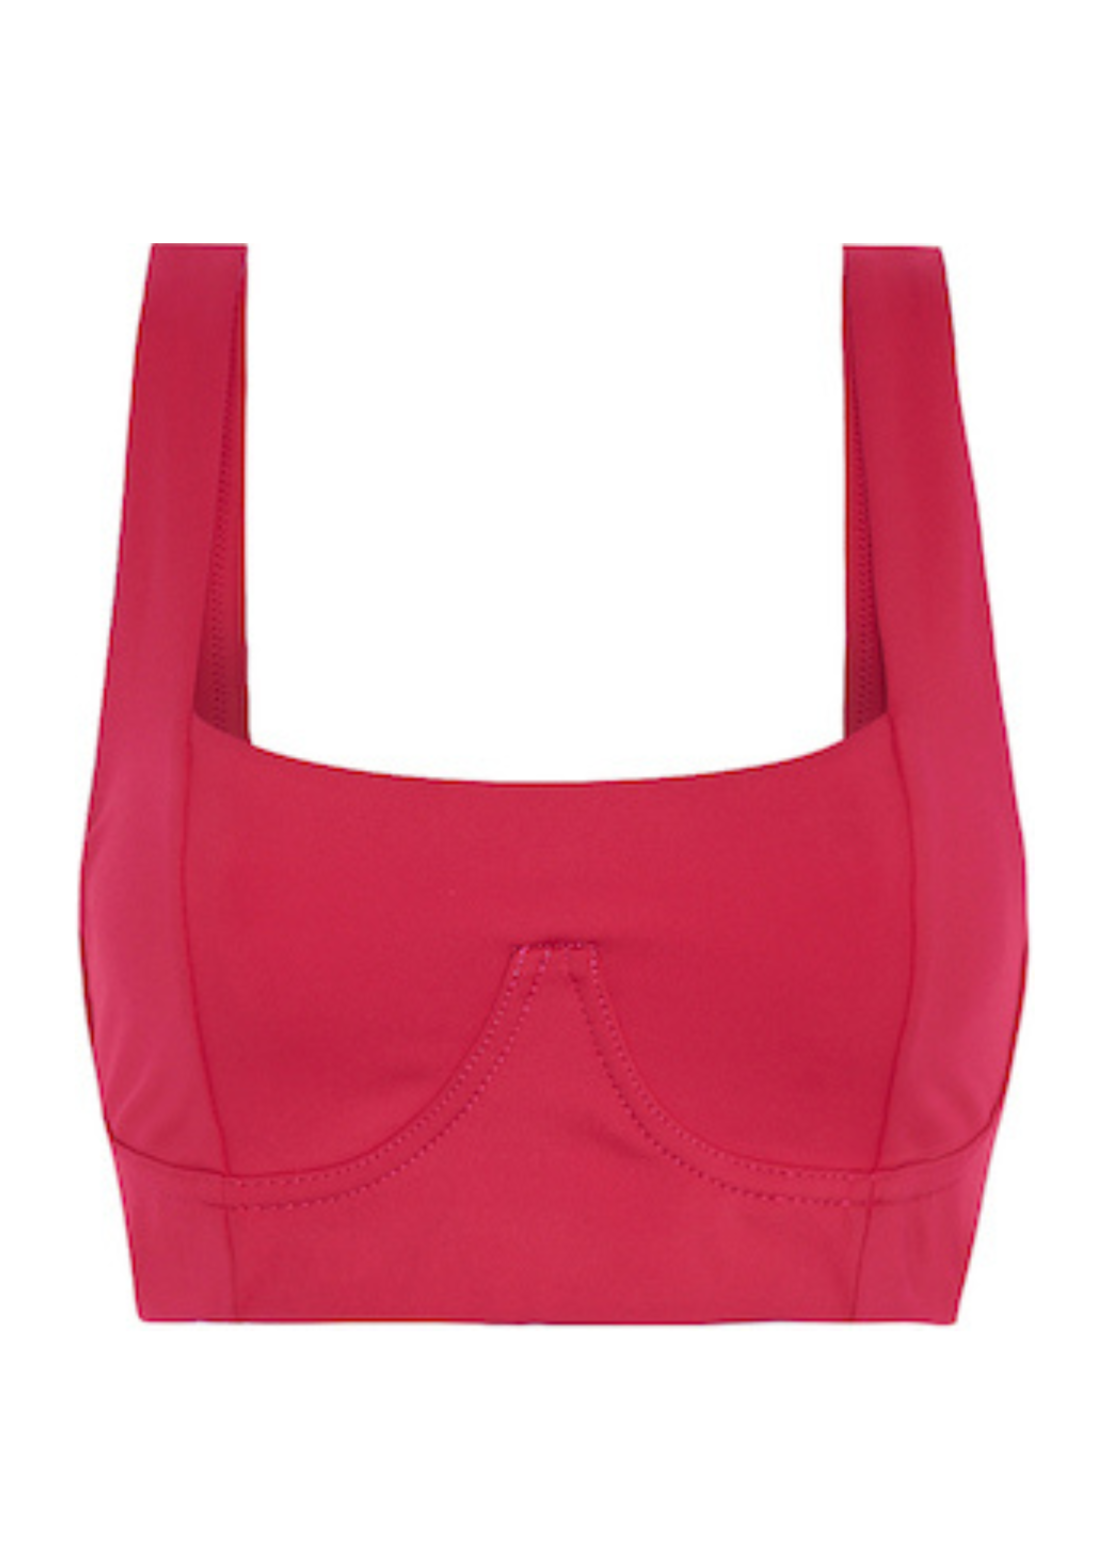 FLY Bra – Nepoagym Official Store